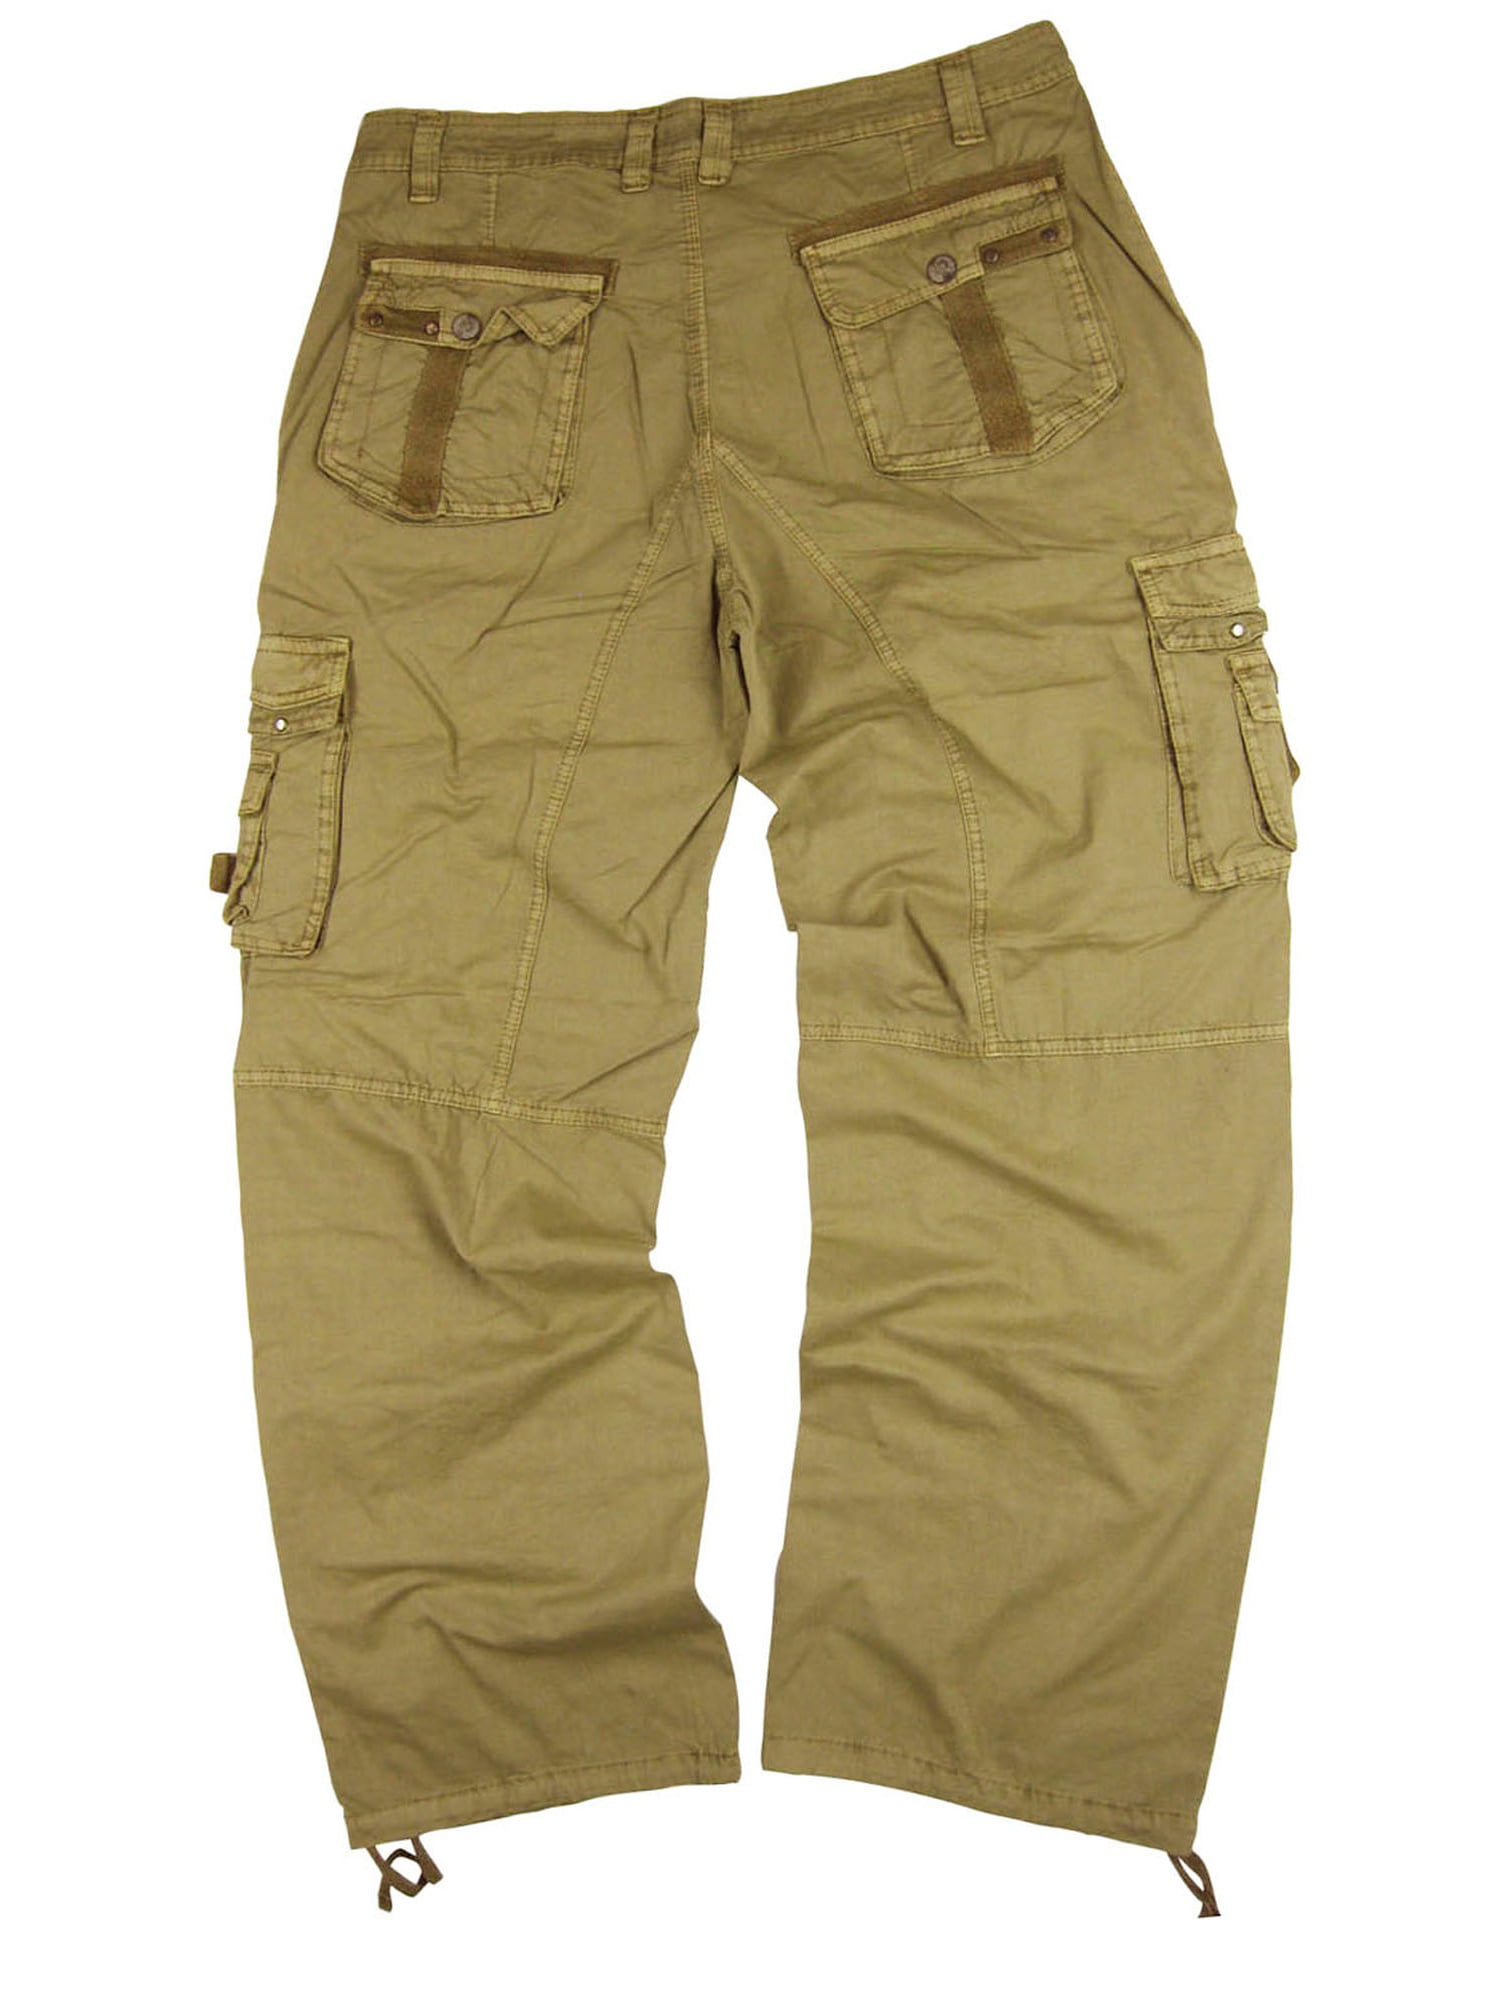 StoneTouch Men's Military-Style Cargo Pants.Have Many Pockets 